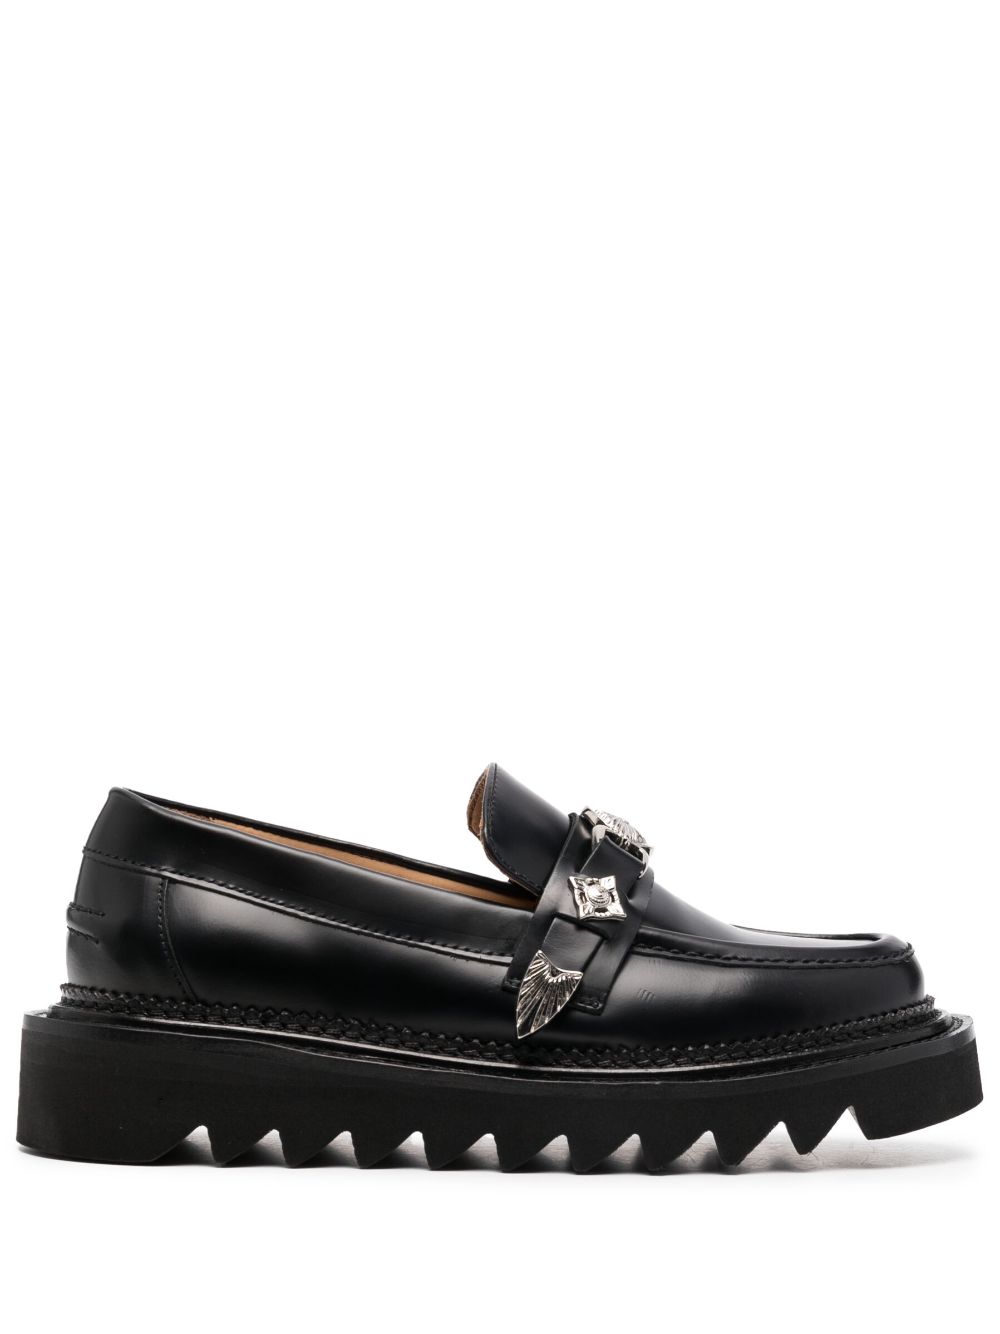 TOGA BUCKLE-DETAIL LEATHER LOAFERS